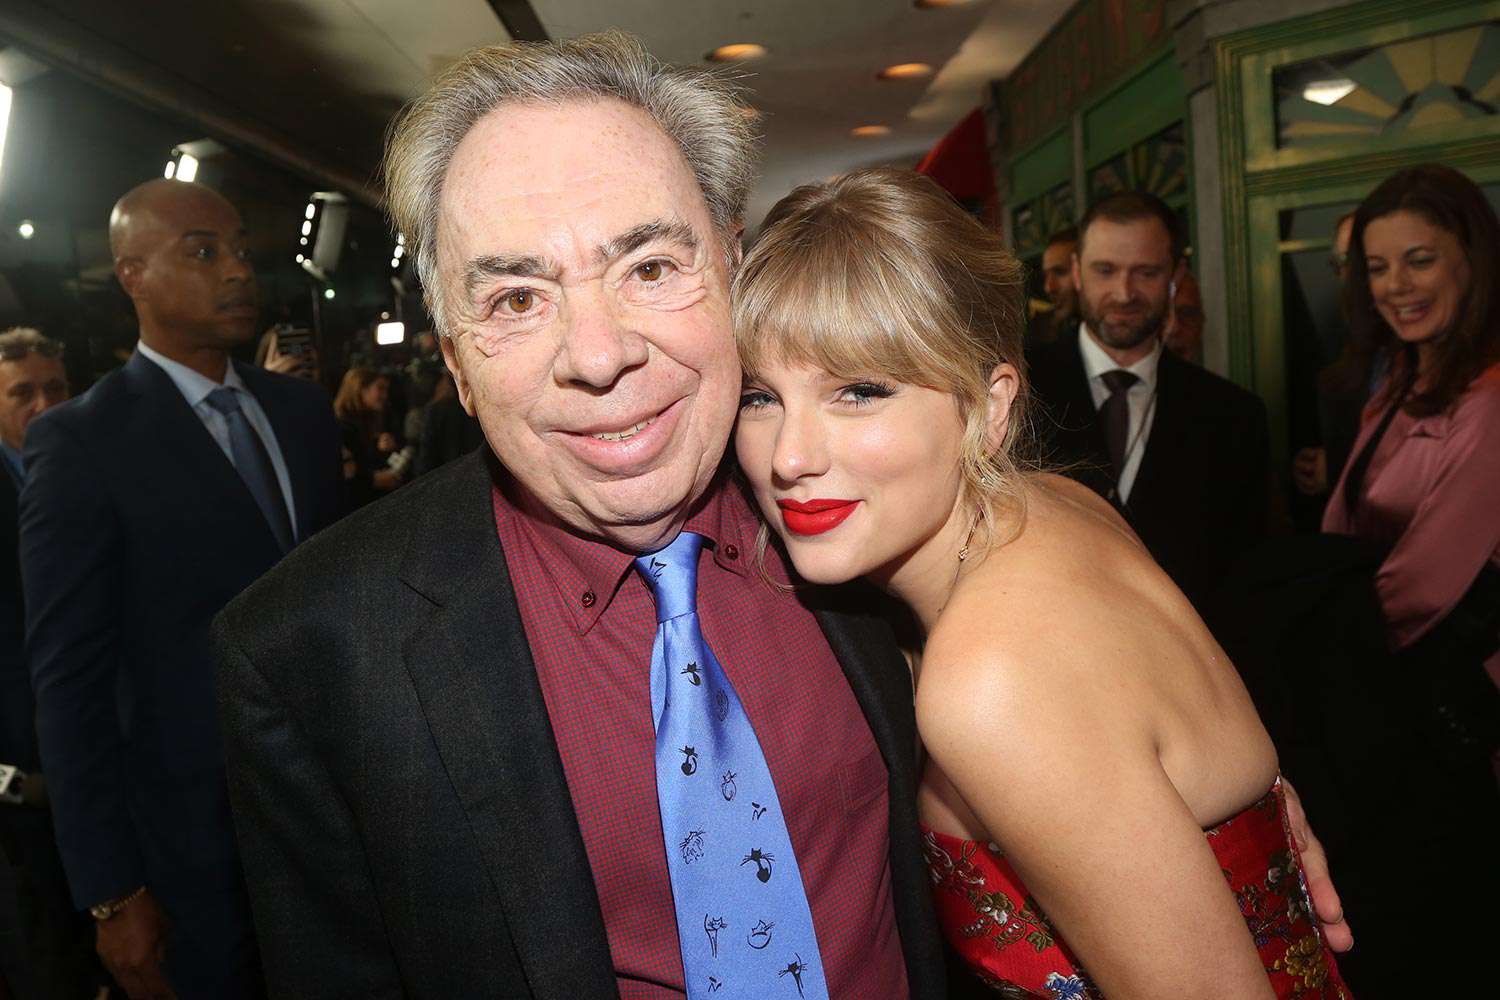 Andrew Lloyd Webber and Taylor Swift